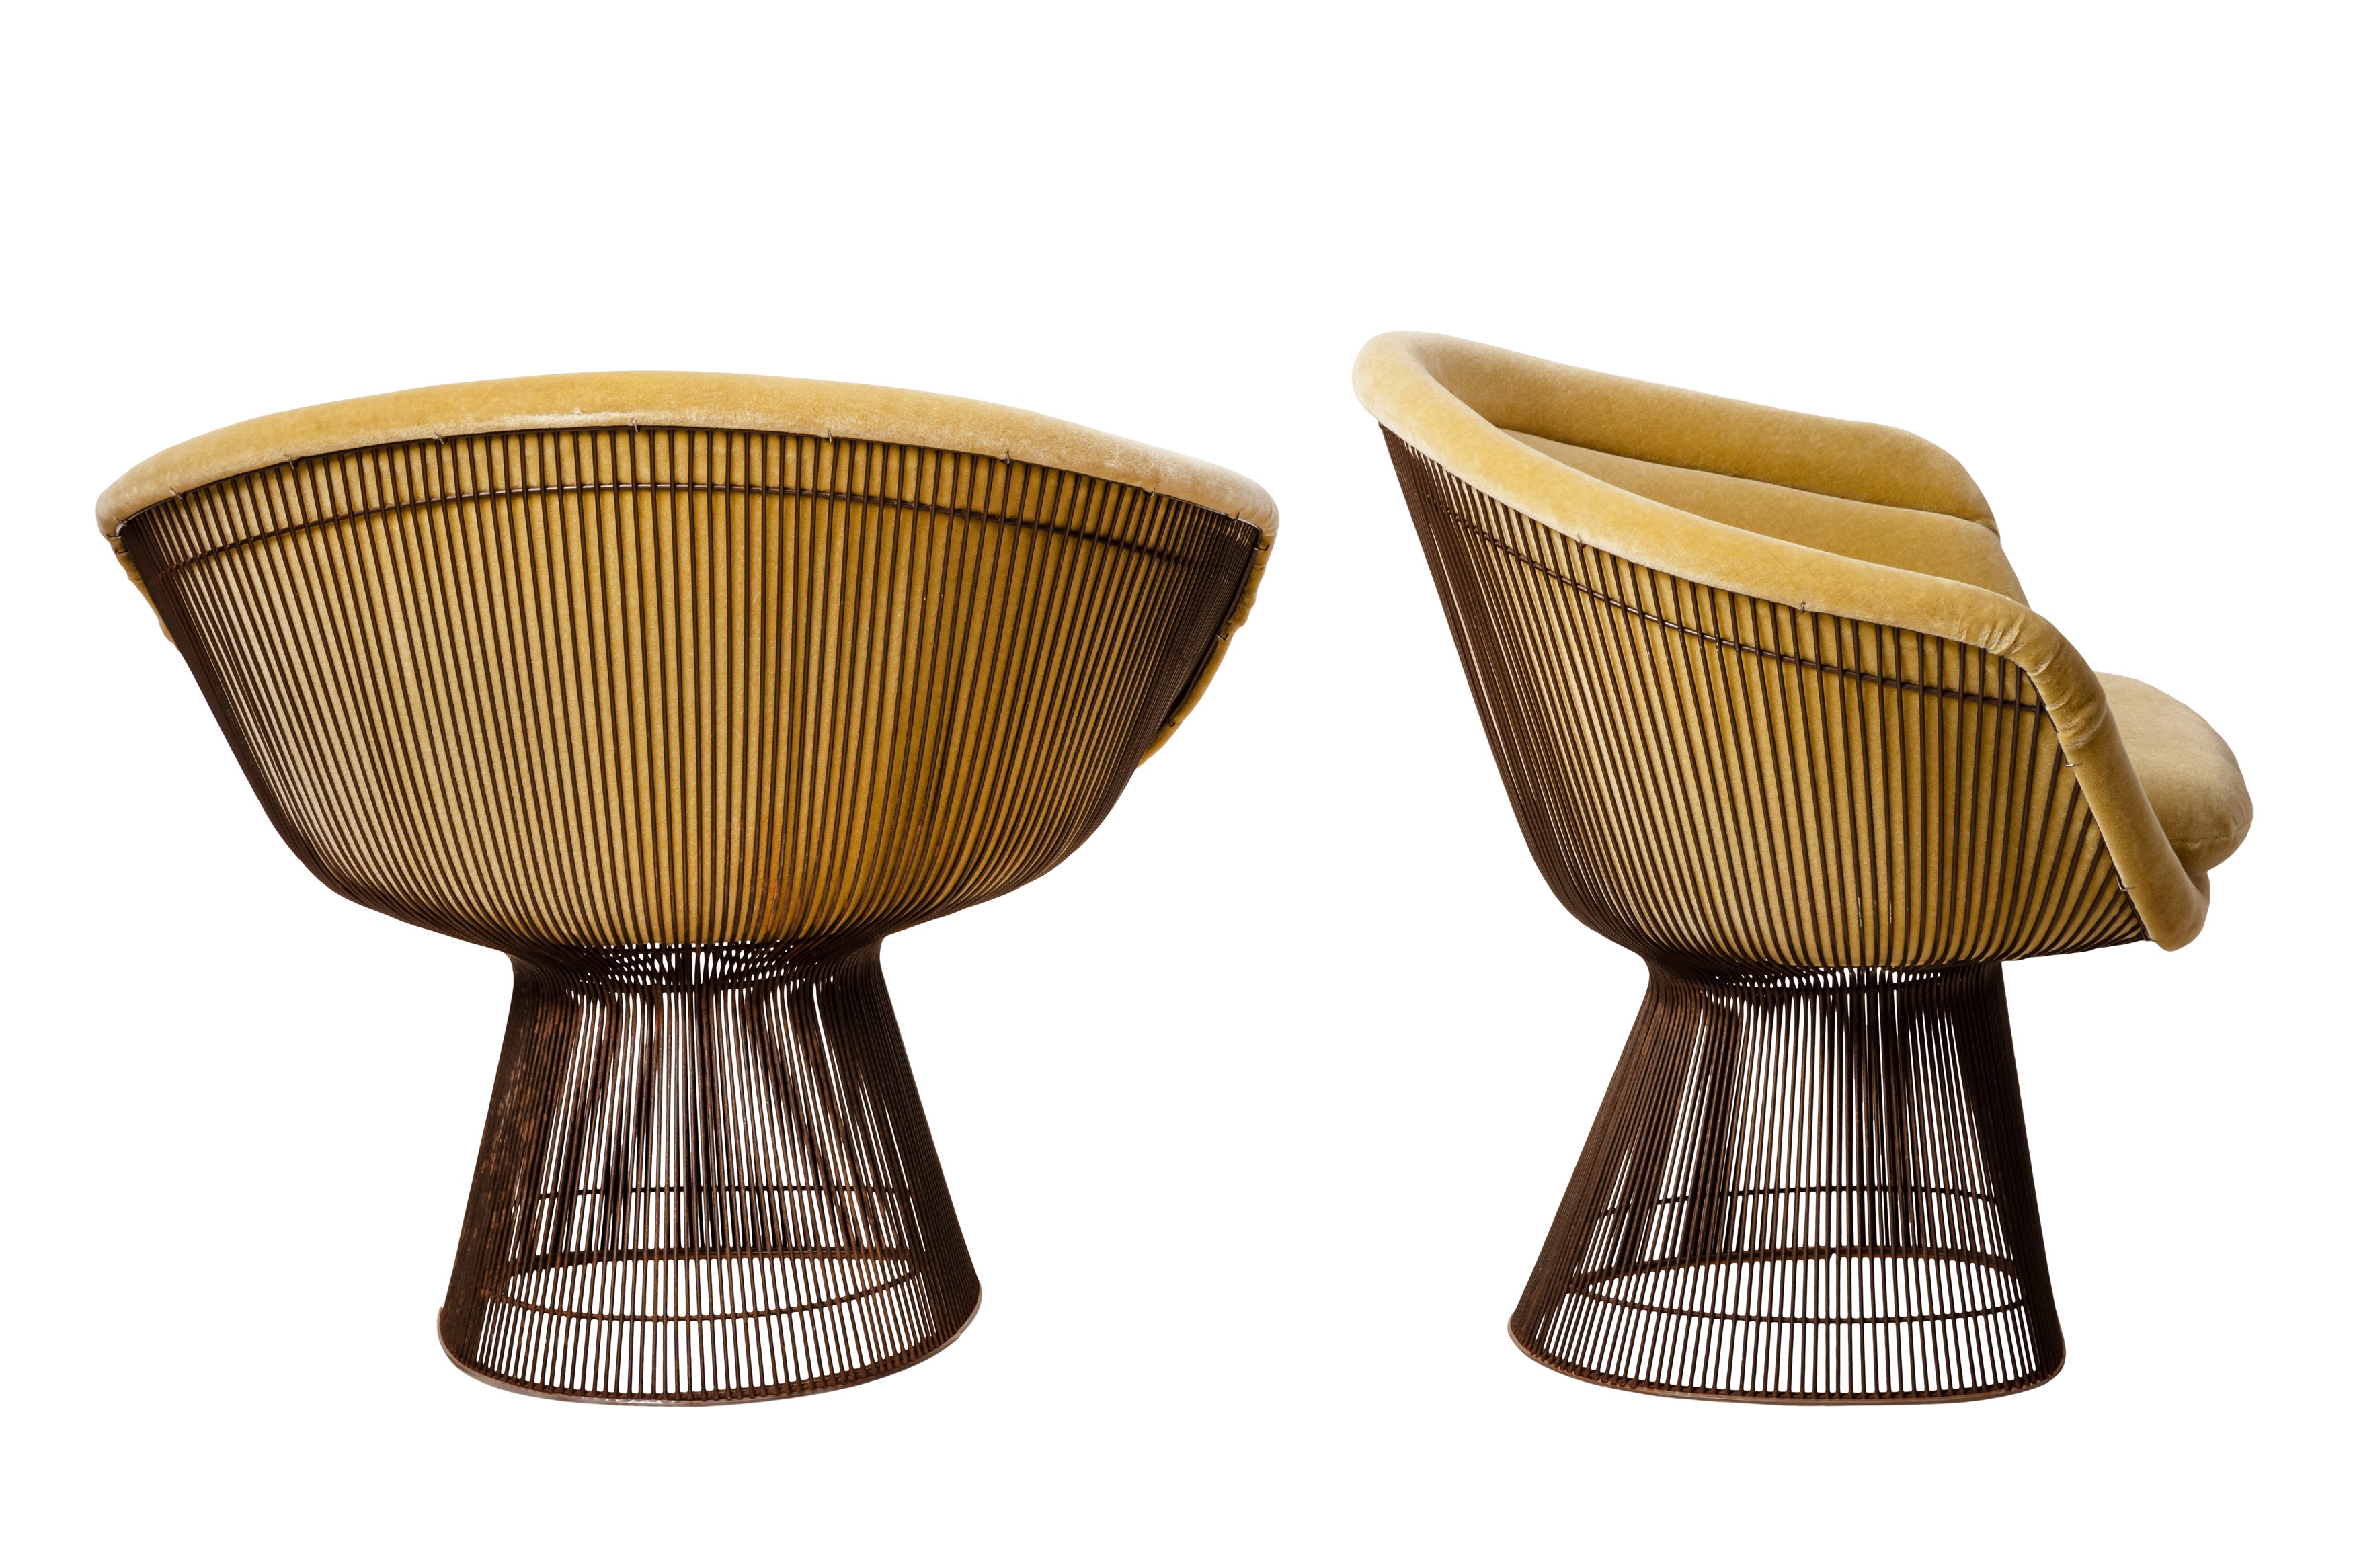 WARREN PLATNER (AMERICAN 1919-2006) FOR KNOLL INTERNATIONAL Preview: Barley Mow Centre - Image 3 of 13